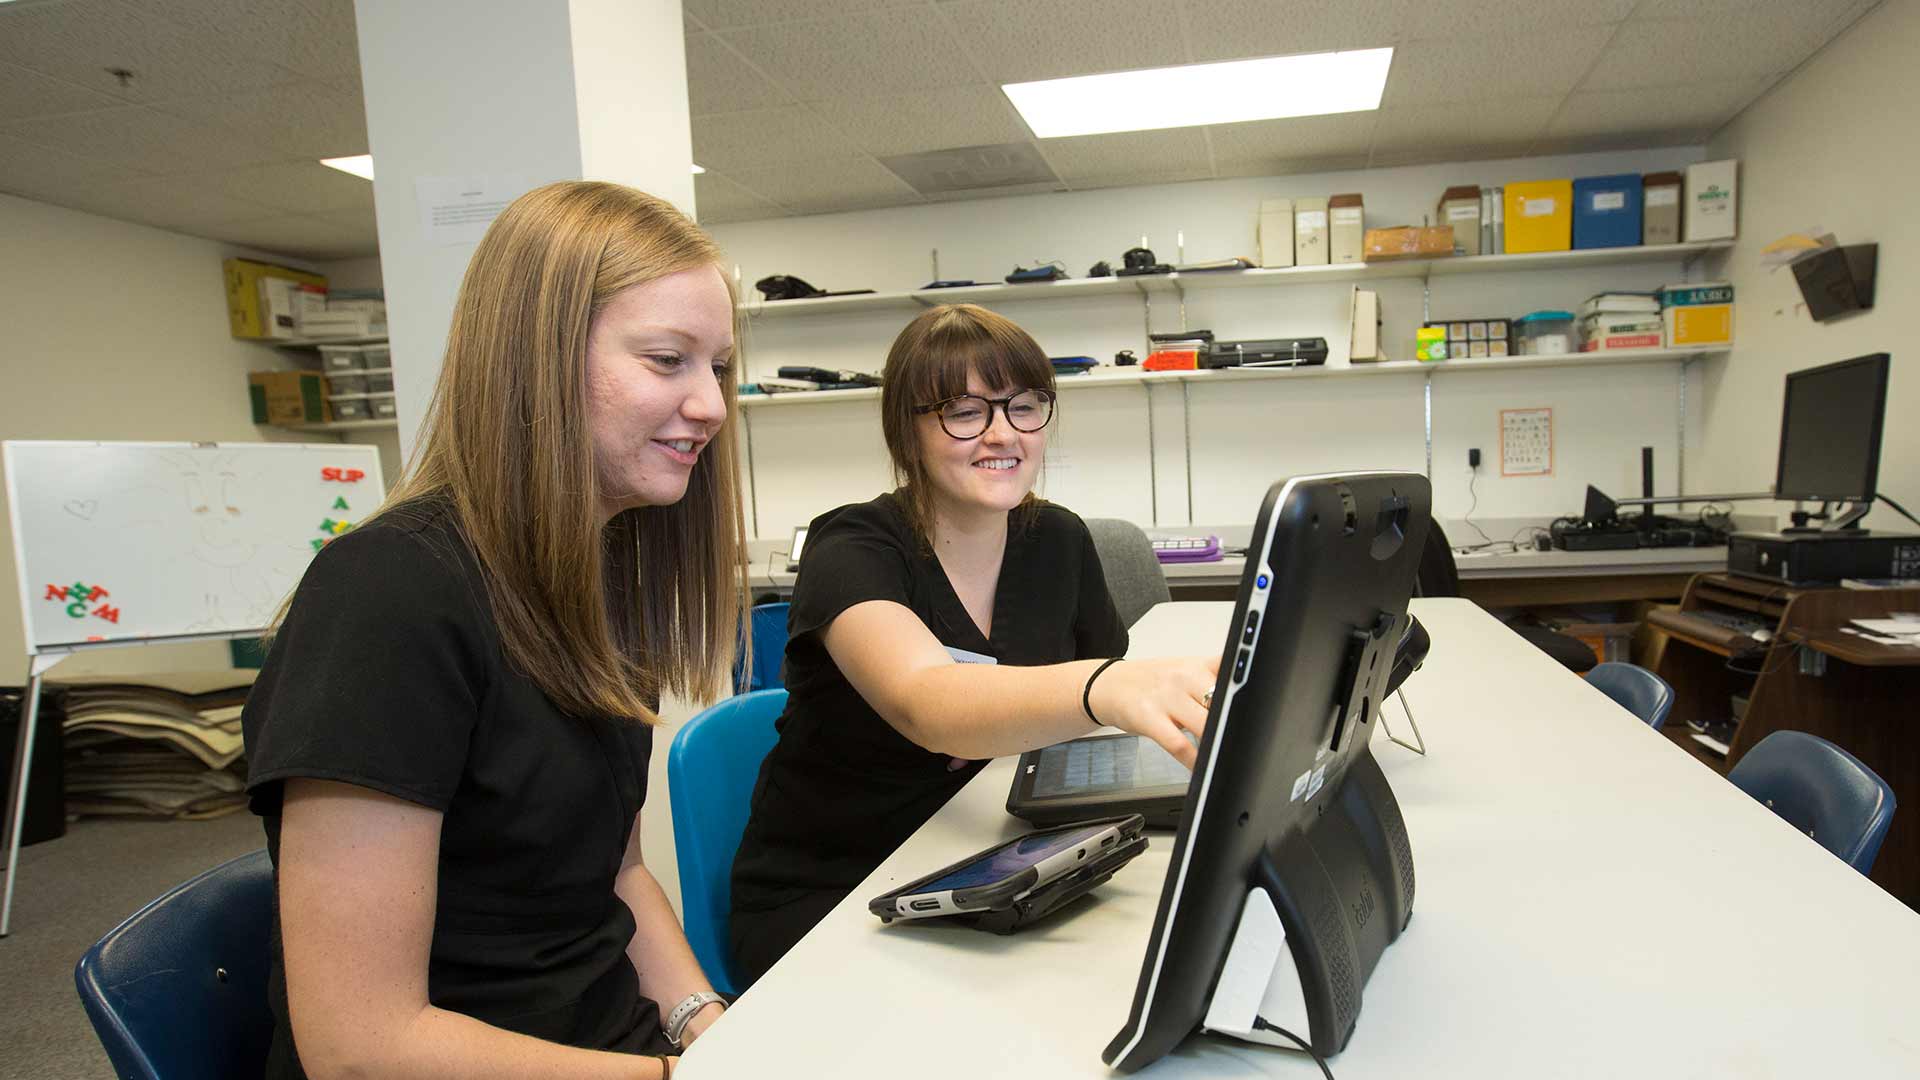 Two speech-language students looking at computer data together.